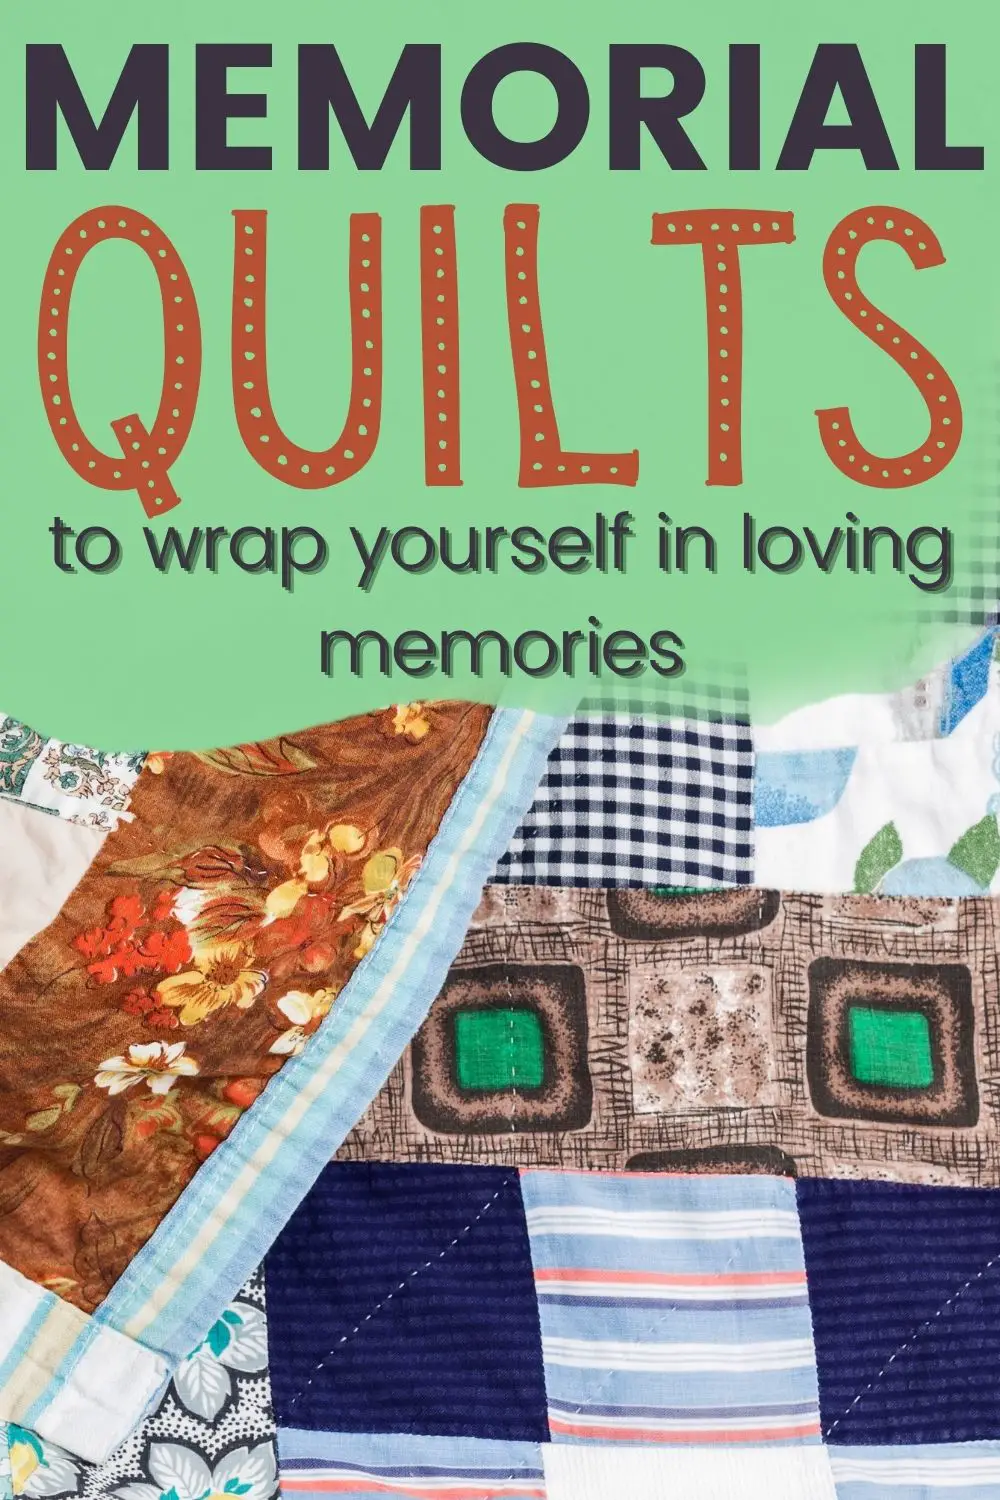 Memorial quilts to wrap yourself in loving memories